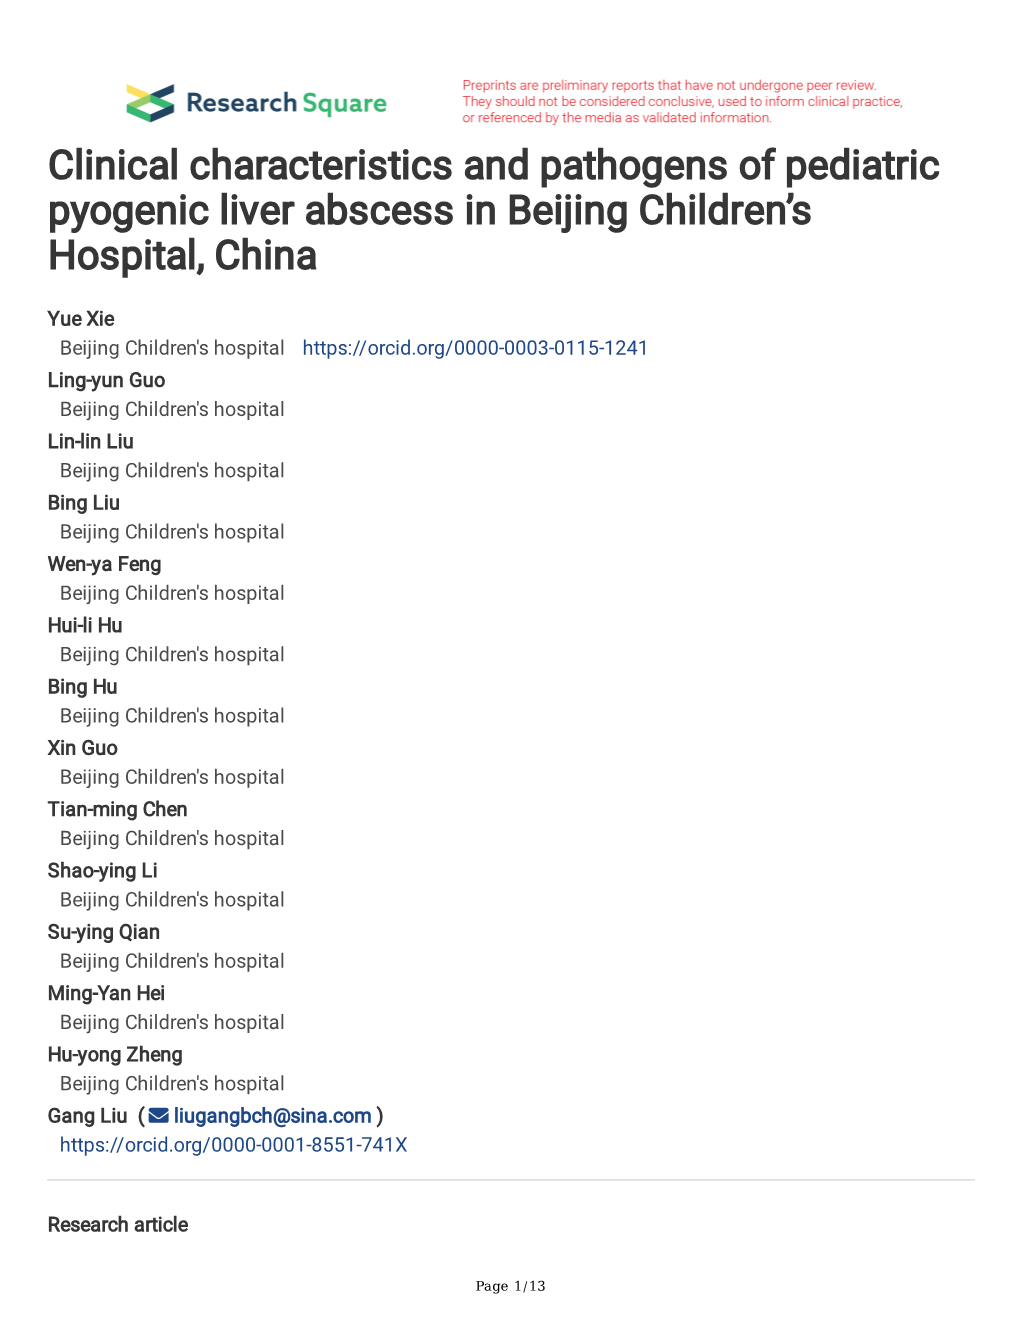 Clinical Characteristics and Pathogens of Pediatric Pyogenic Liver Abscess in Beijing Children’S Hospital, China